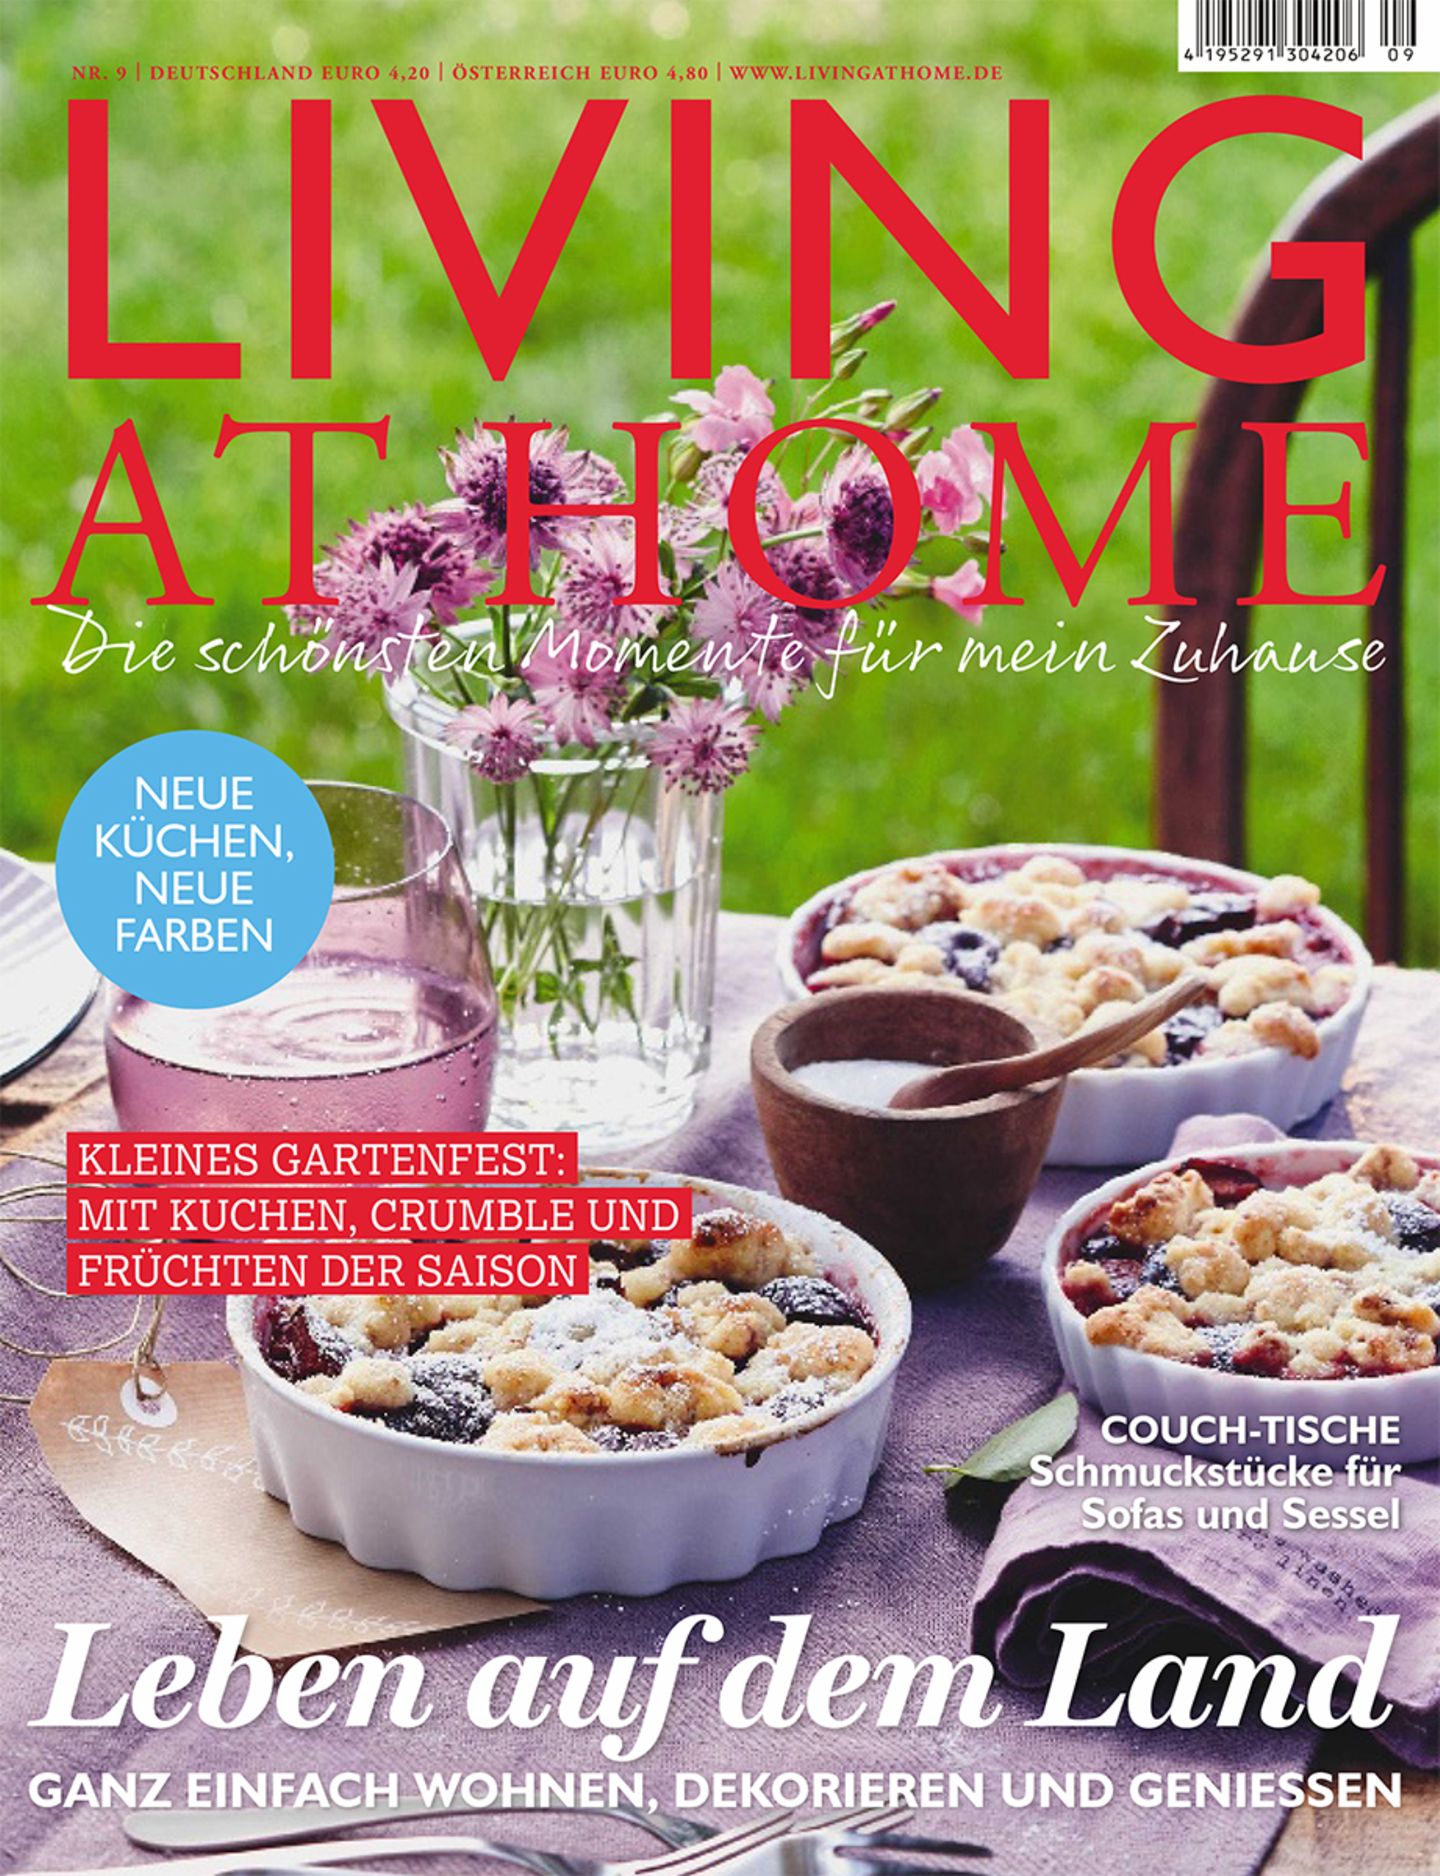 LIVING AT HOME 9/2015